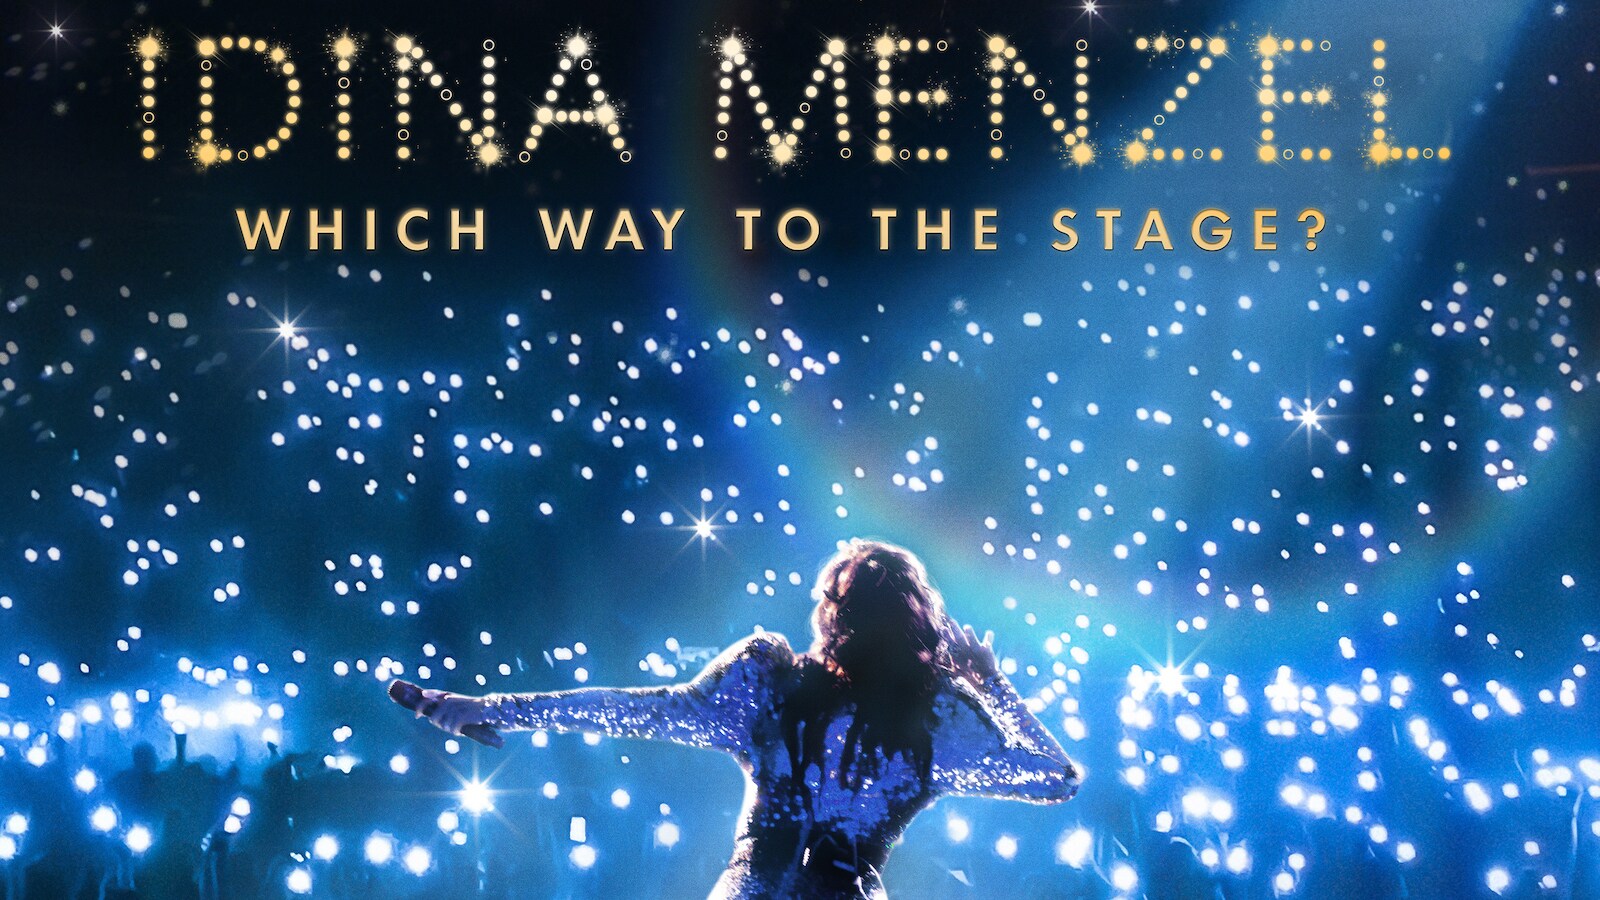 Idina Menzel: Which Way to the Stage? Key Art